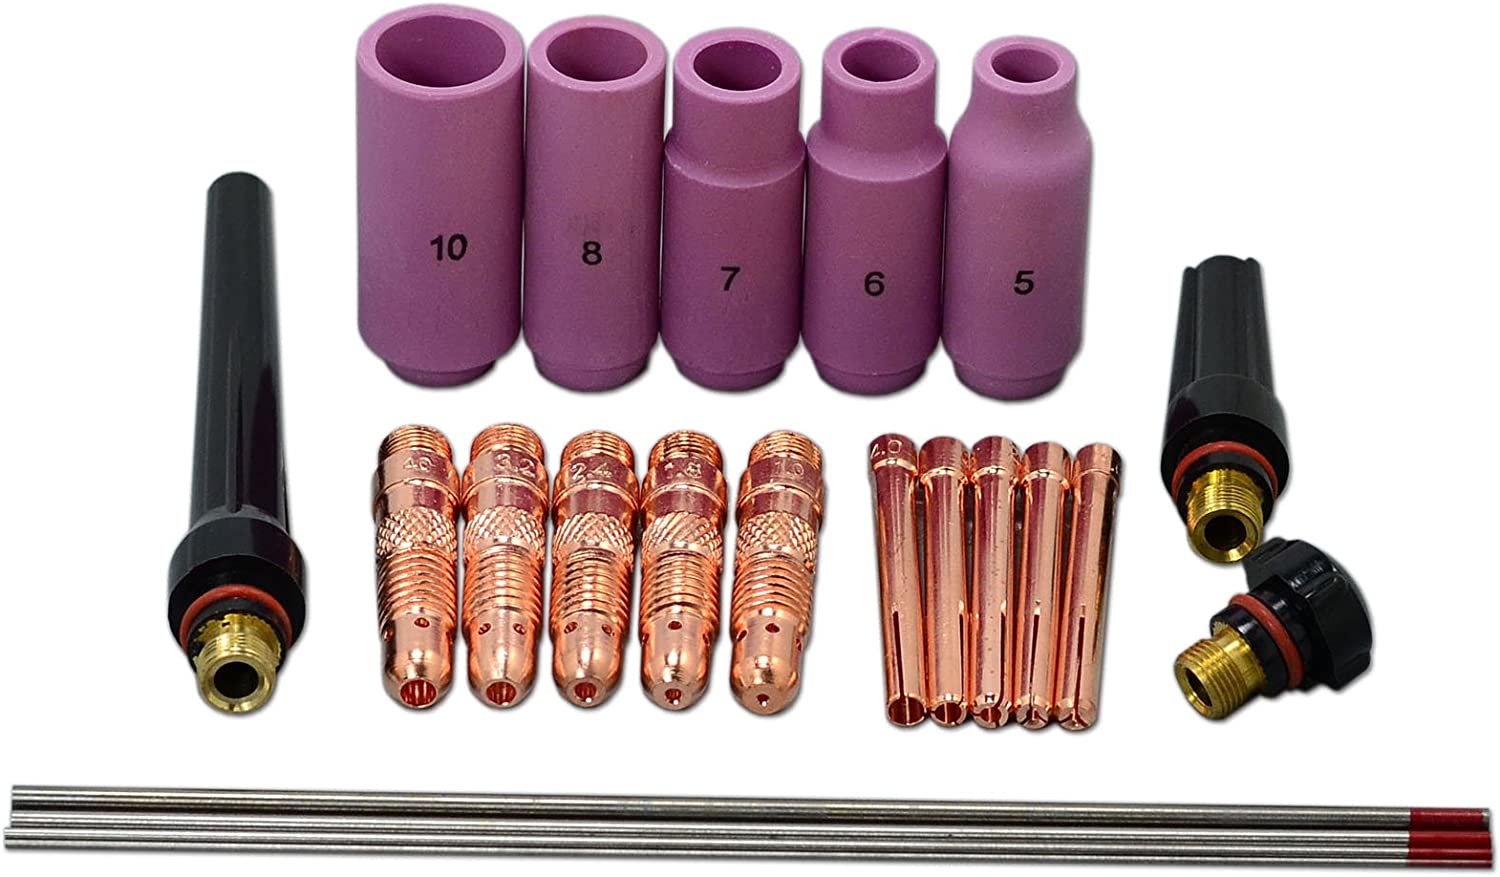 TIG Collet Body TIG Back Cap and 2 Percent Thoriated TIG Tungsten Electrode Kit Fit WP 17 18 26 TIG Welding Torch Consumables Accessories 22pcs